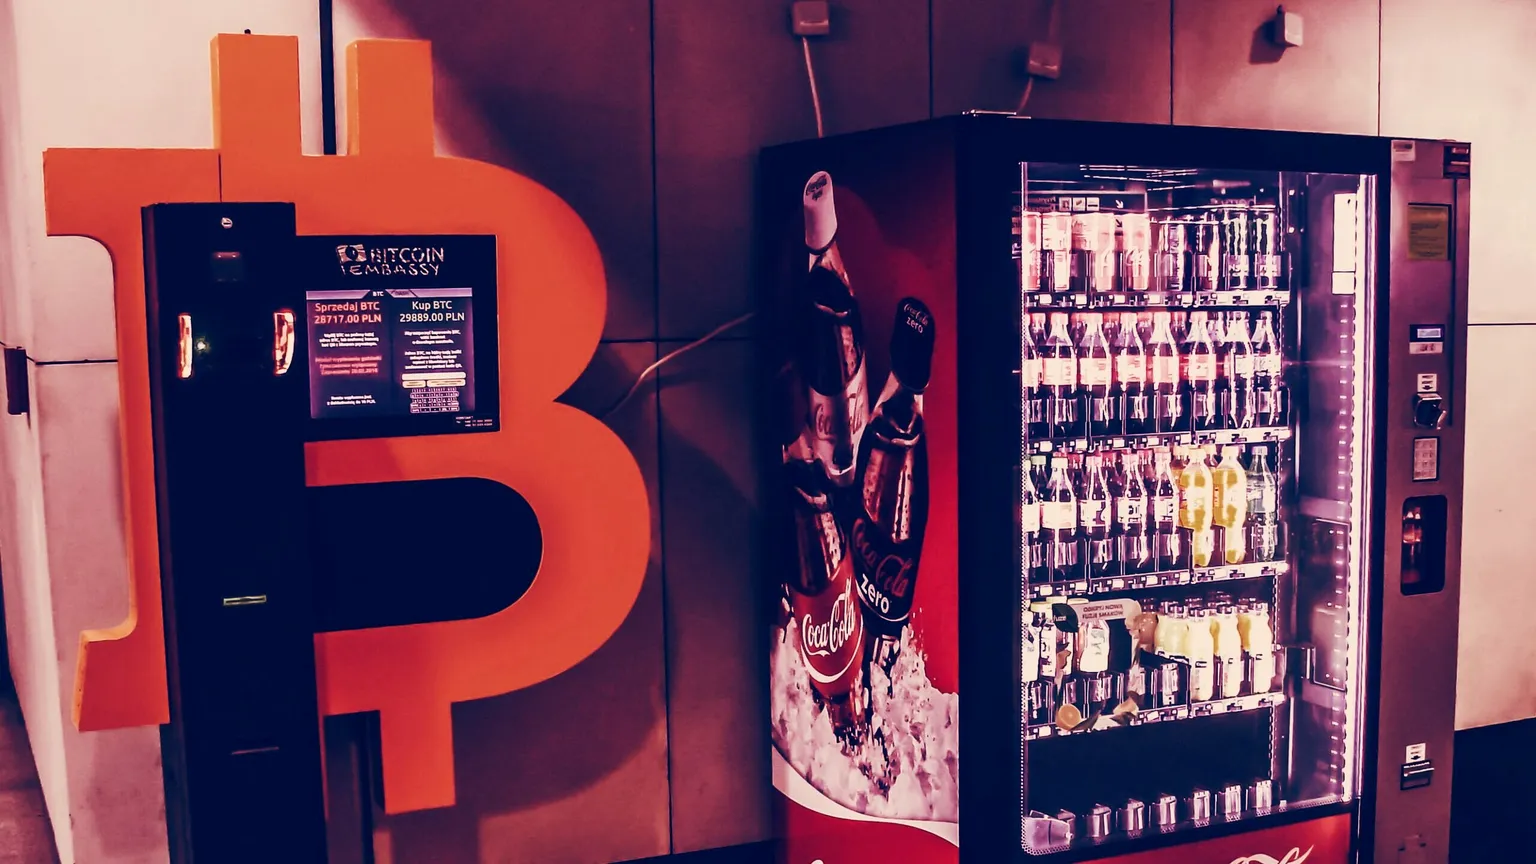 Bitcoin ATMs are becoming ubiquitous. Image: Shutterstock